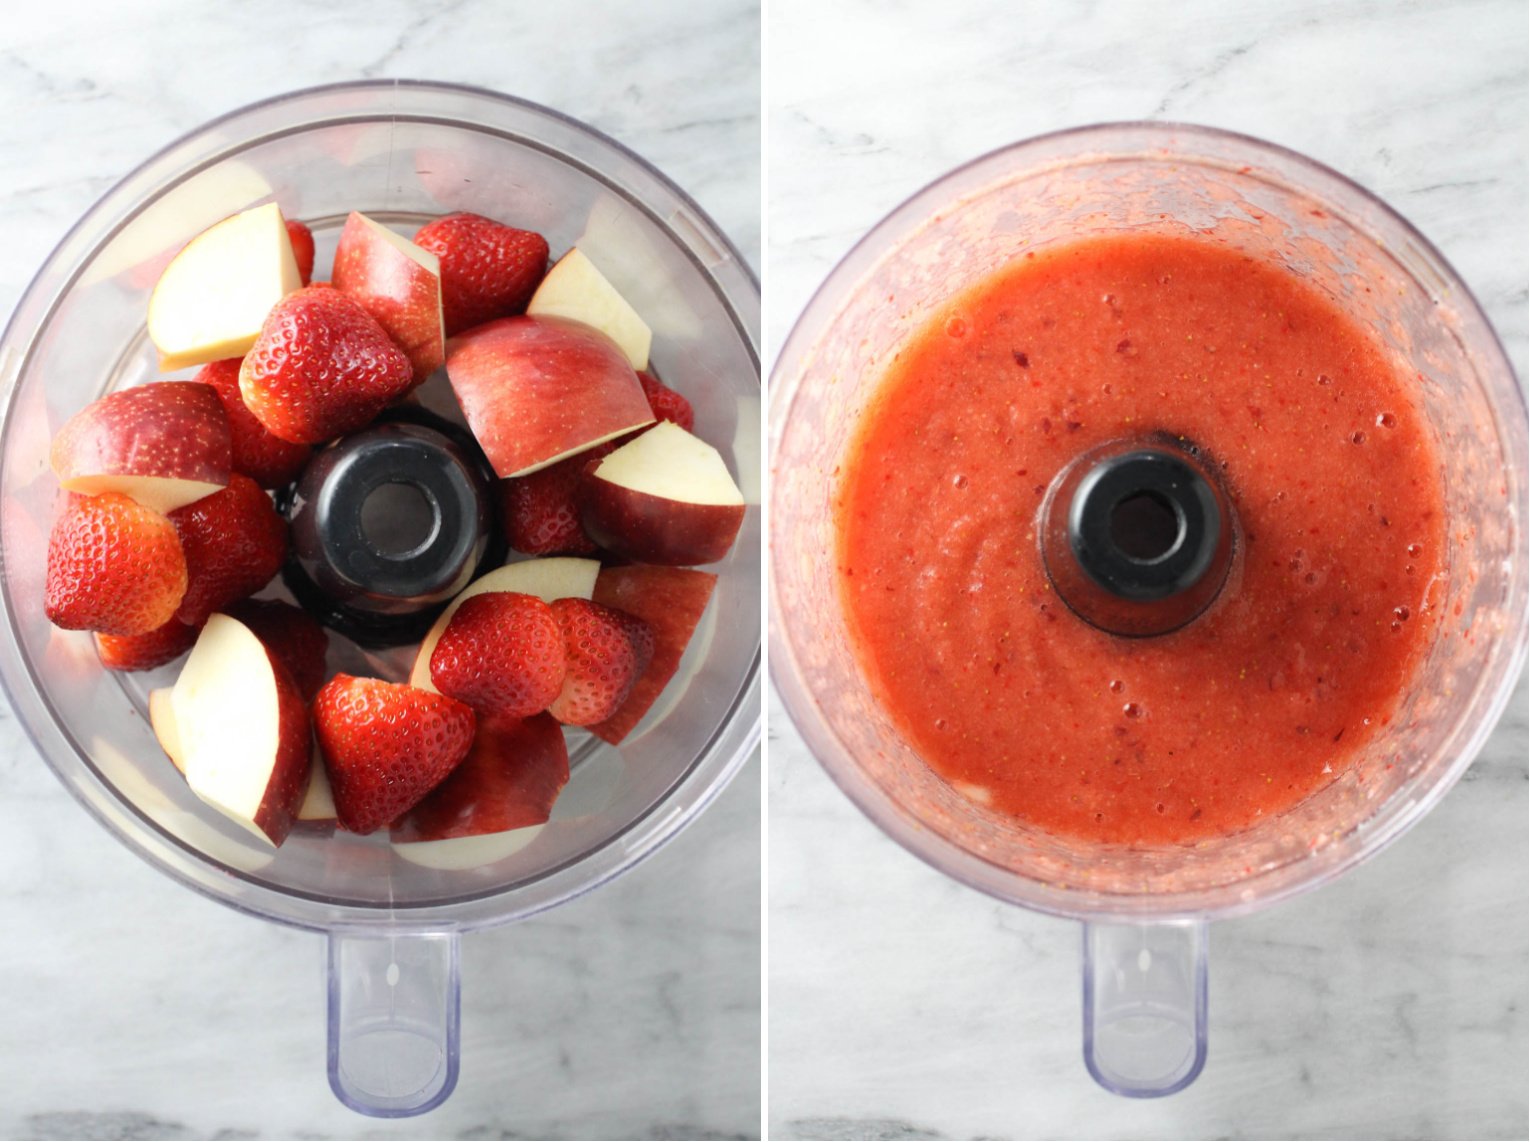 Two side-by-side images. On the left image, strawberries and apple slices in a bowl of food processor. On the right image, pureed stawberries and apples.